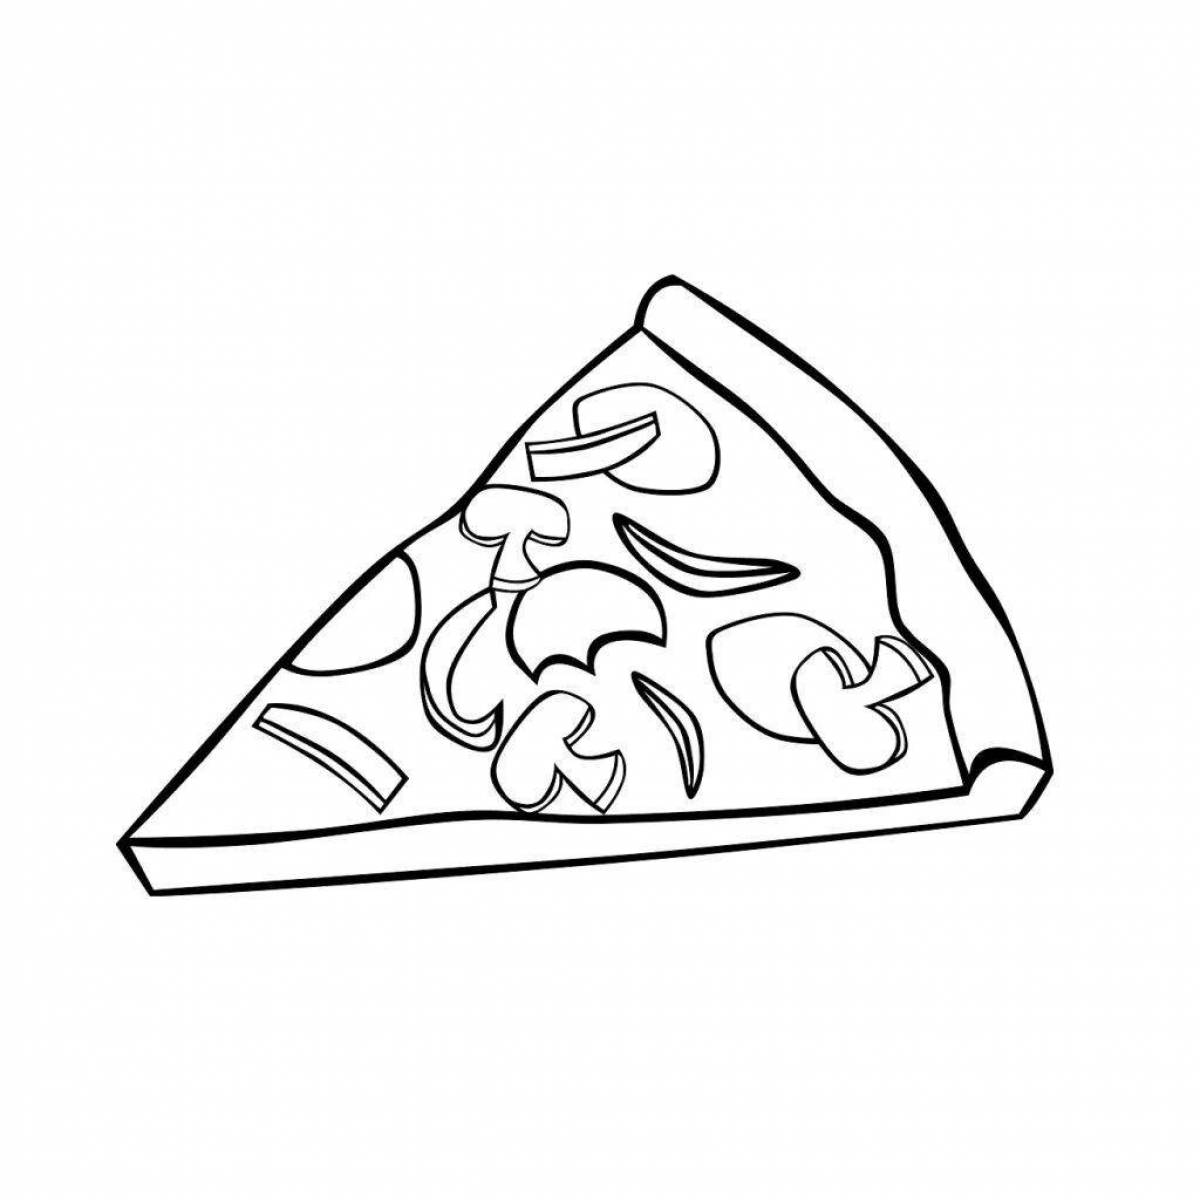 Spicy pizza drawing